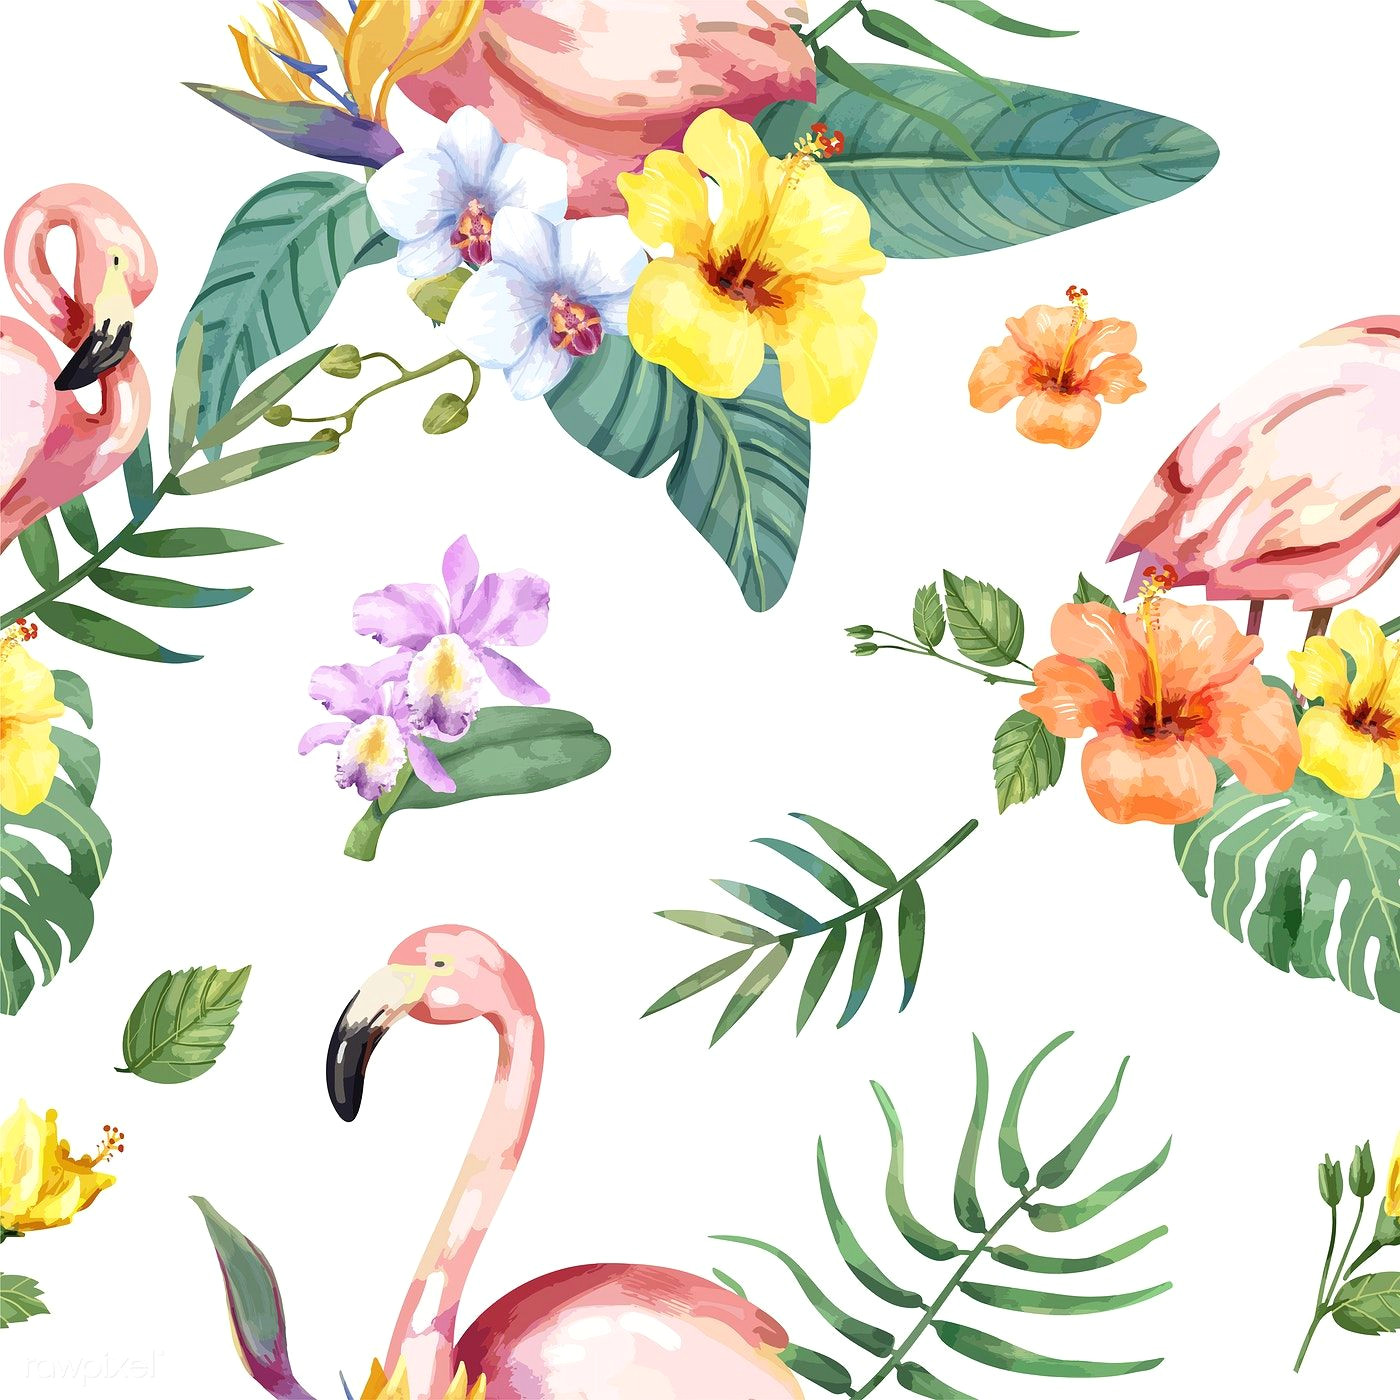 Drawings Of Flowers and Birds Hand Drawn Flamingo Bird with Tropical Flowers Premium Image by